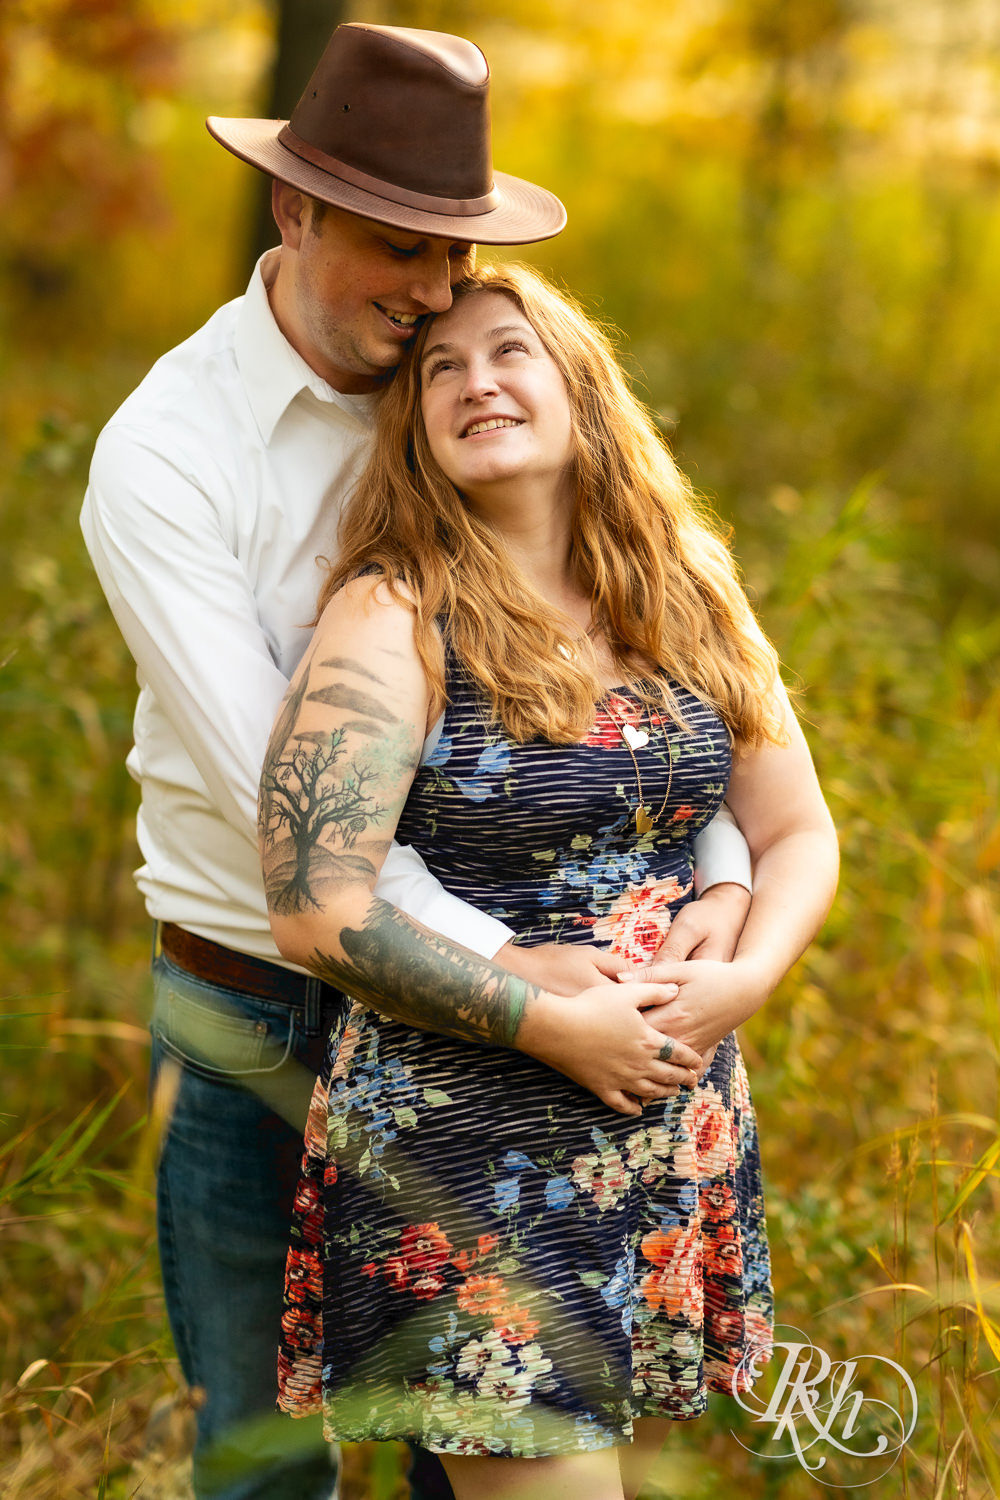 Man in hat and jeans and woman in dress snuggle during fall engagement photos at Lebanon Hills Regional Park in Eagan, Minnesota.